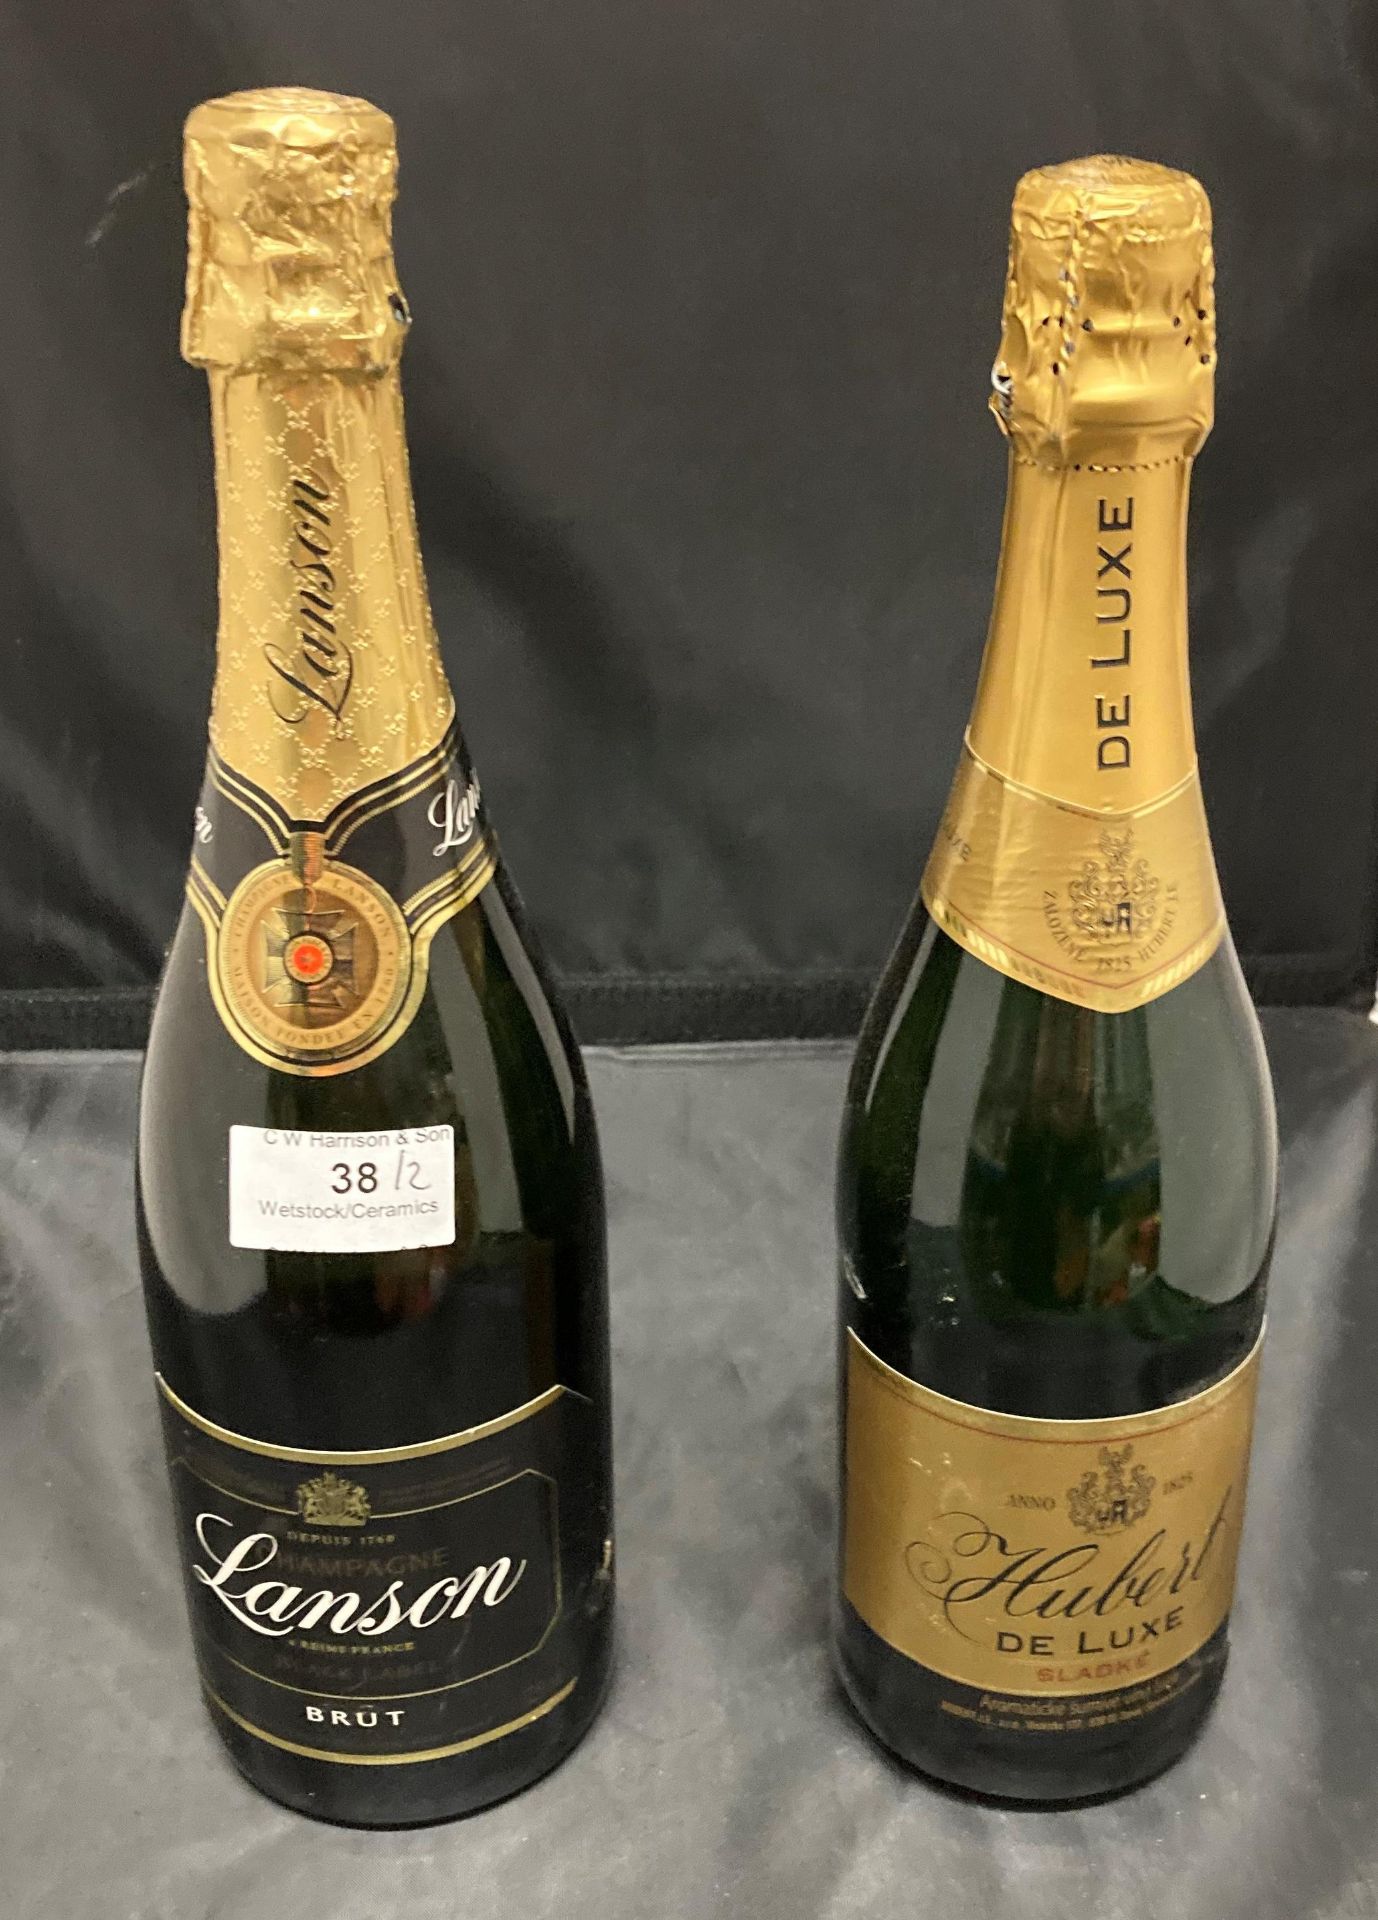 A 750ml bottle of Lanson Brut Champagne and a 75cl bottle of Hubert de Luxe sparkling wine